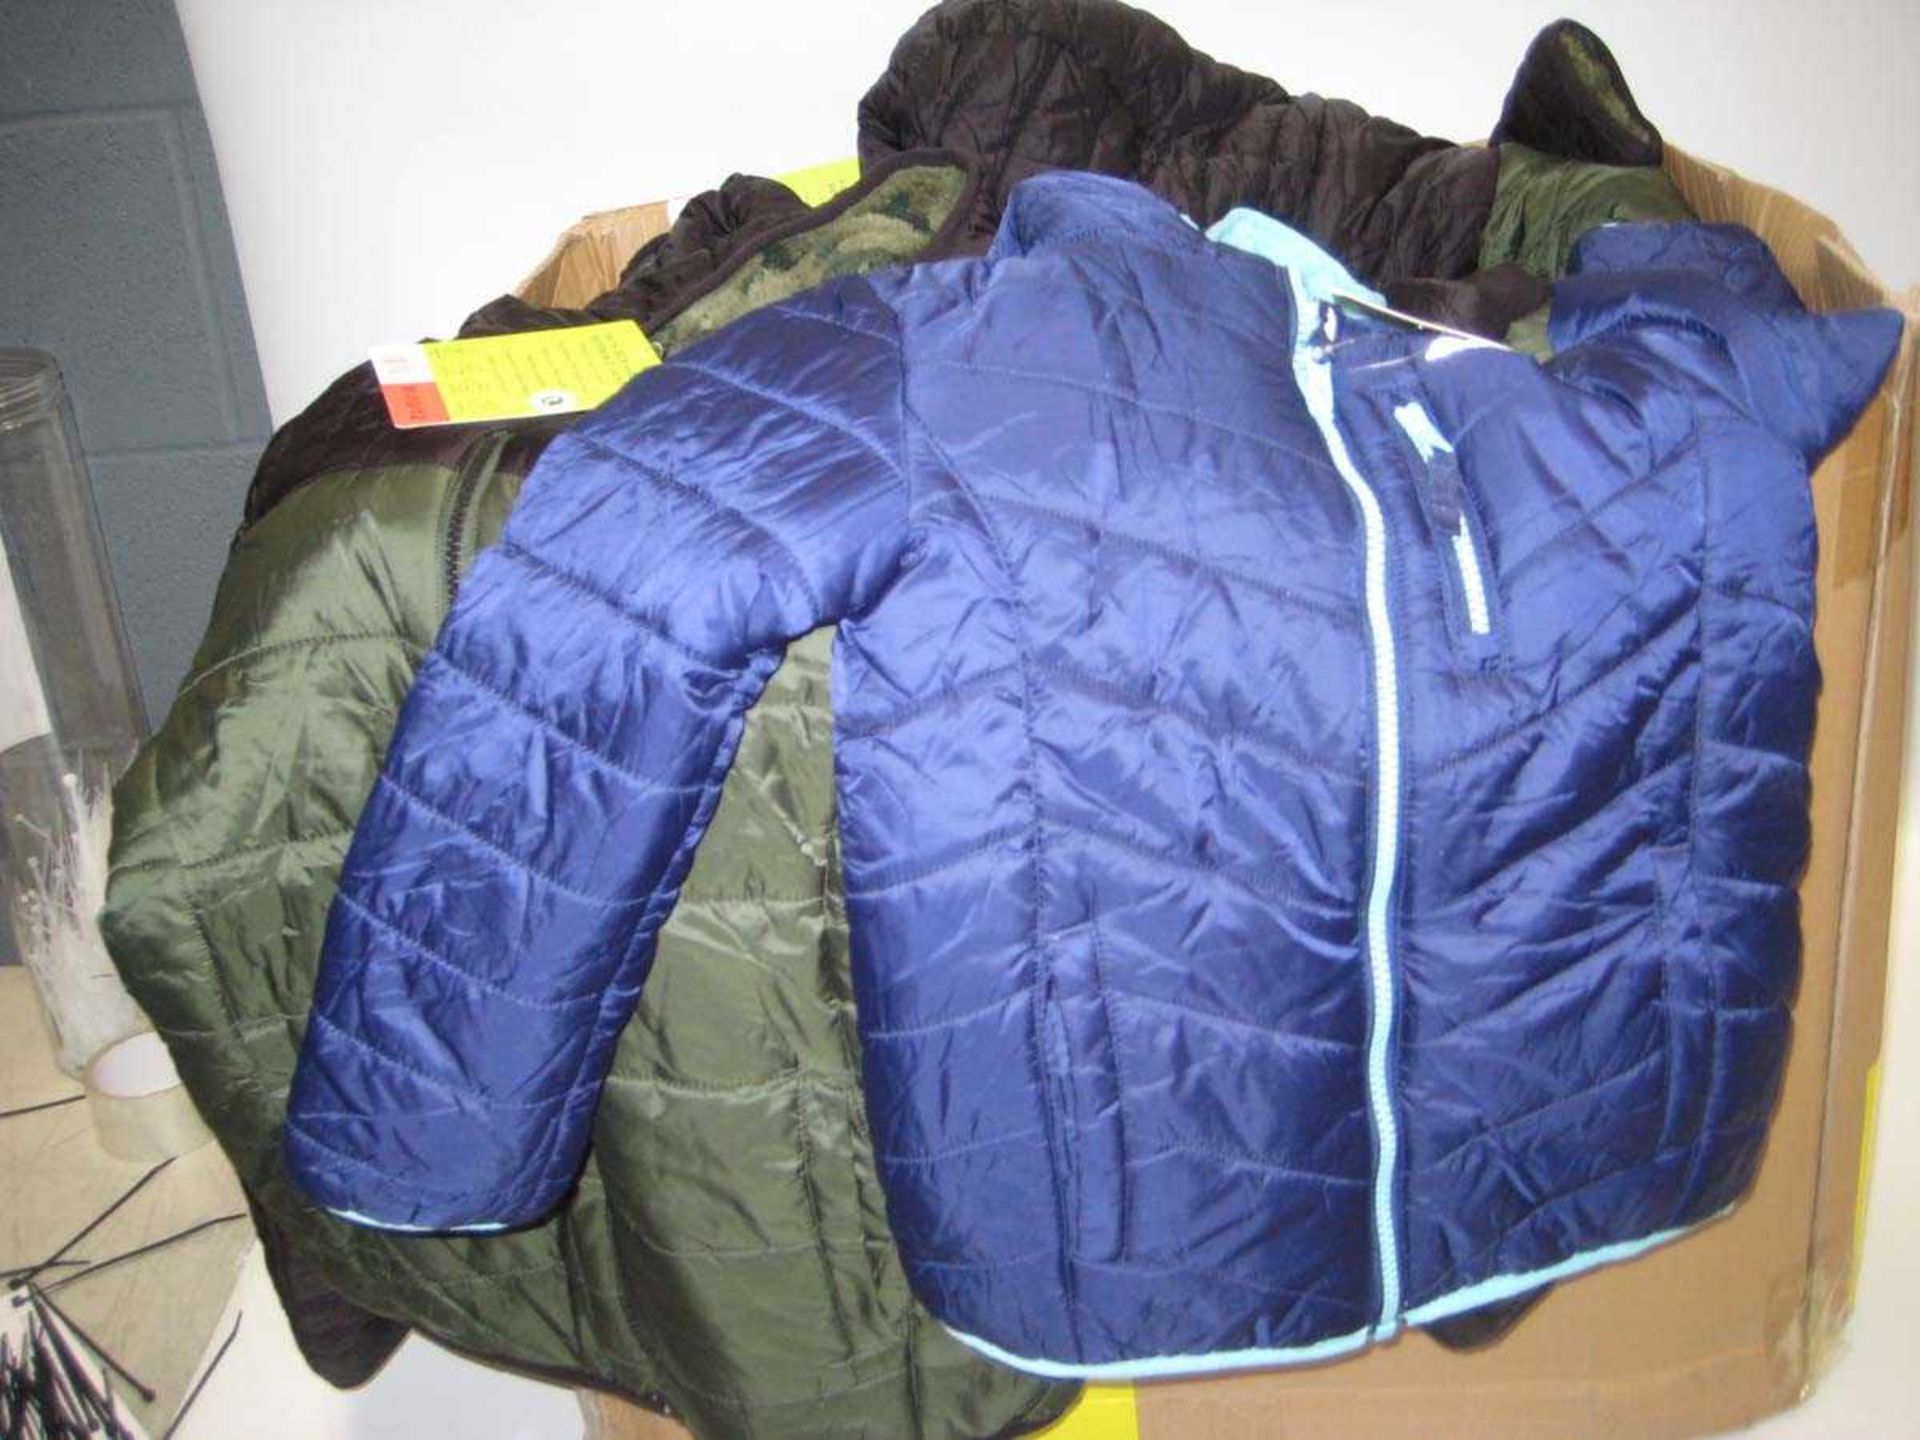 Box containing 22 kids quilted and hooded jackets by Eddie Bauer, various sizes, some in blue and